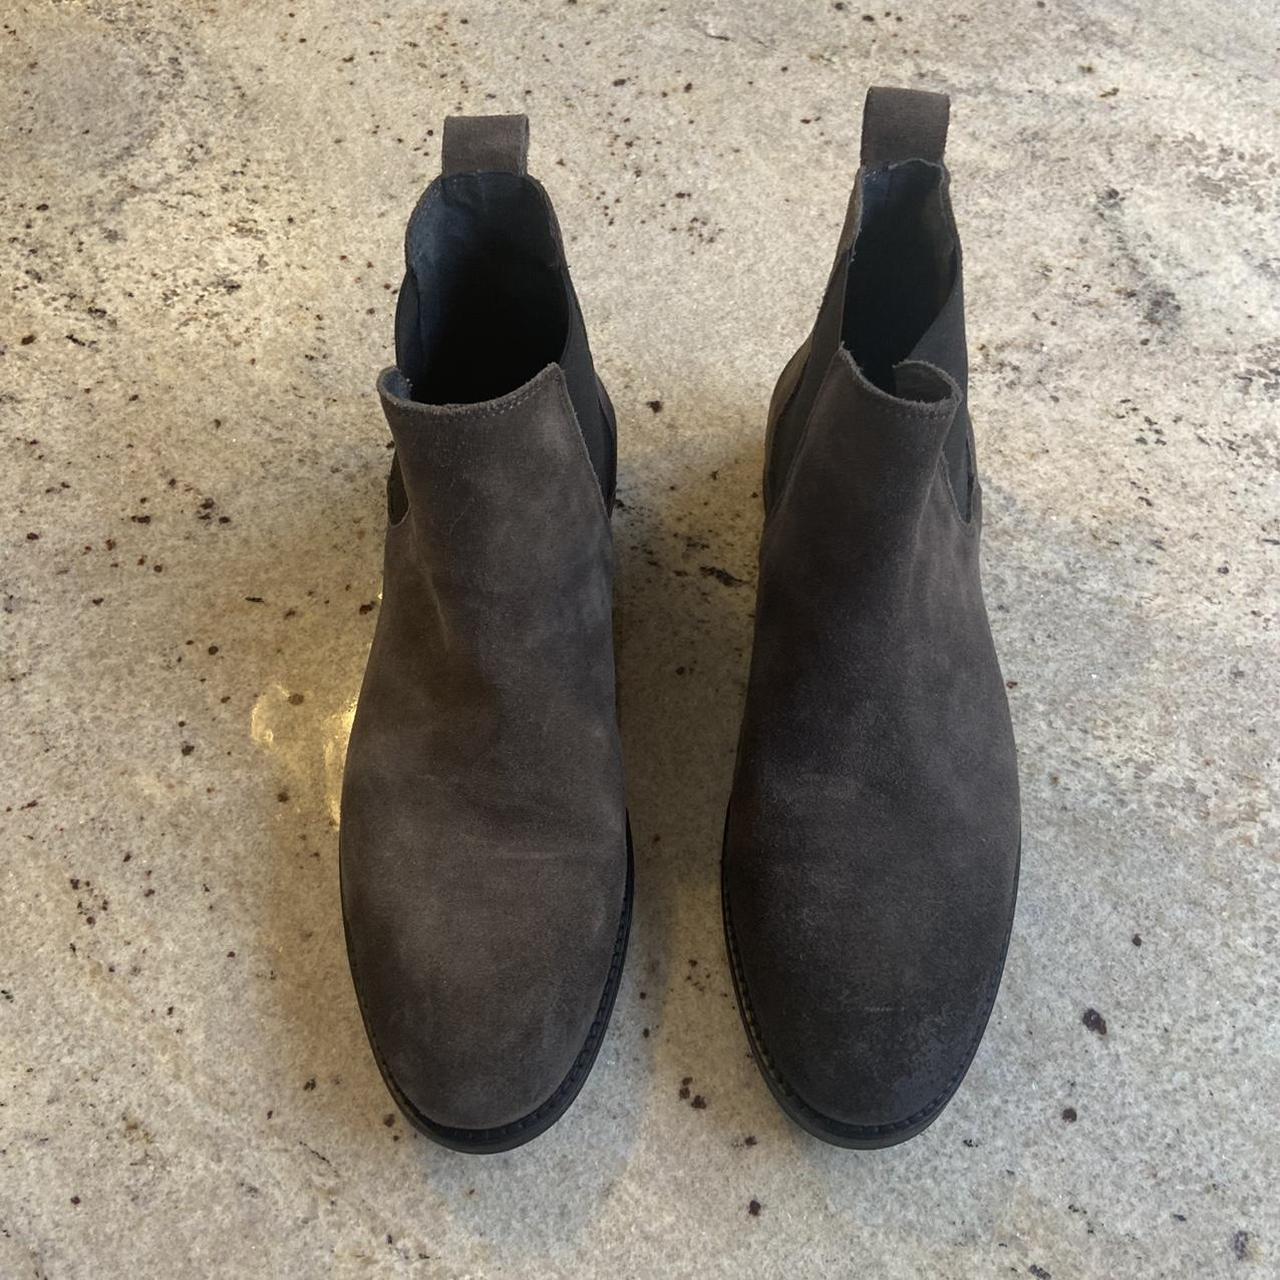 GREY SUEDE CHELSEA BOOTS - Like New, Worn Once -... - Depop